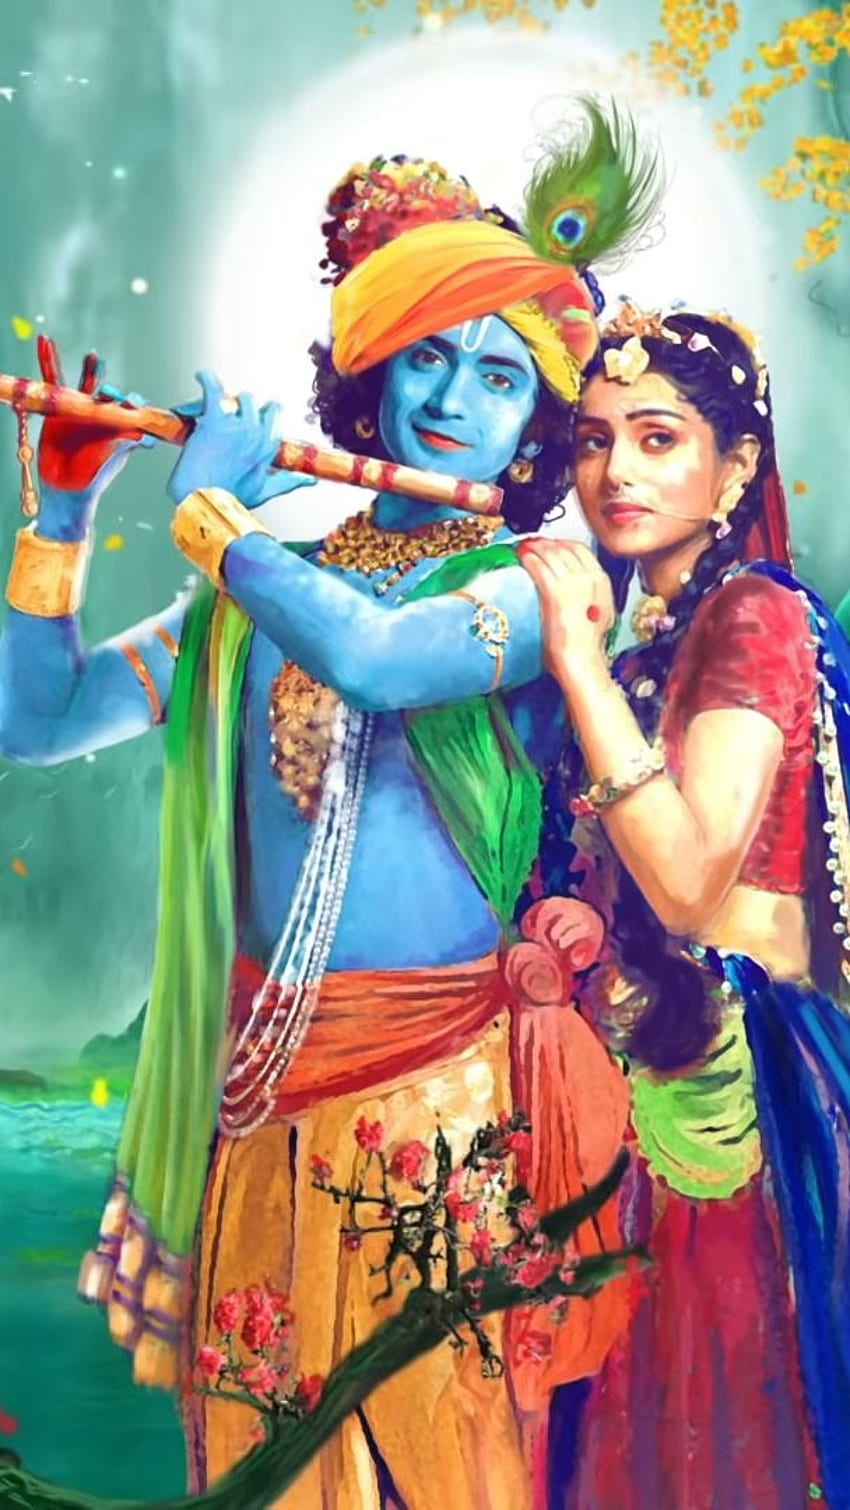 Incredible Assortment of 999+ Radha Krishna Images in Full 4K Quality